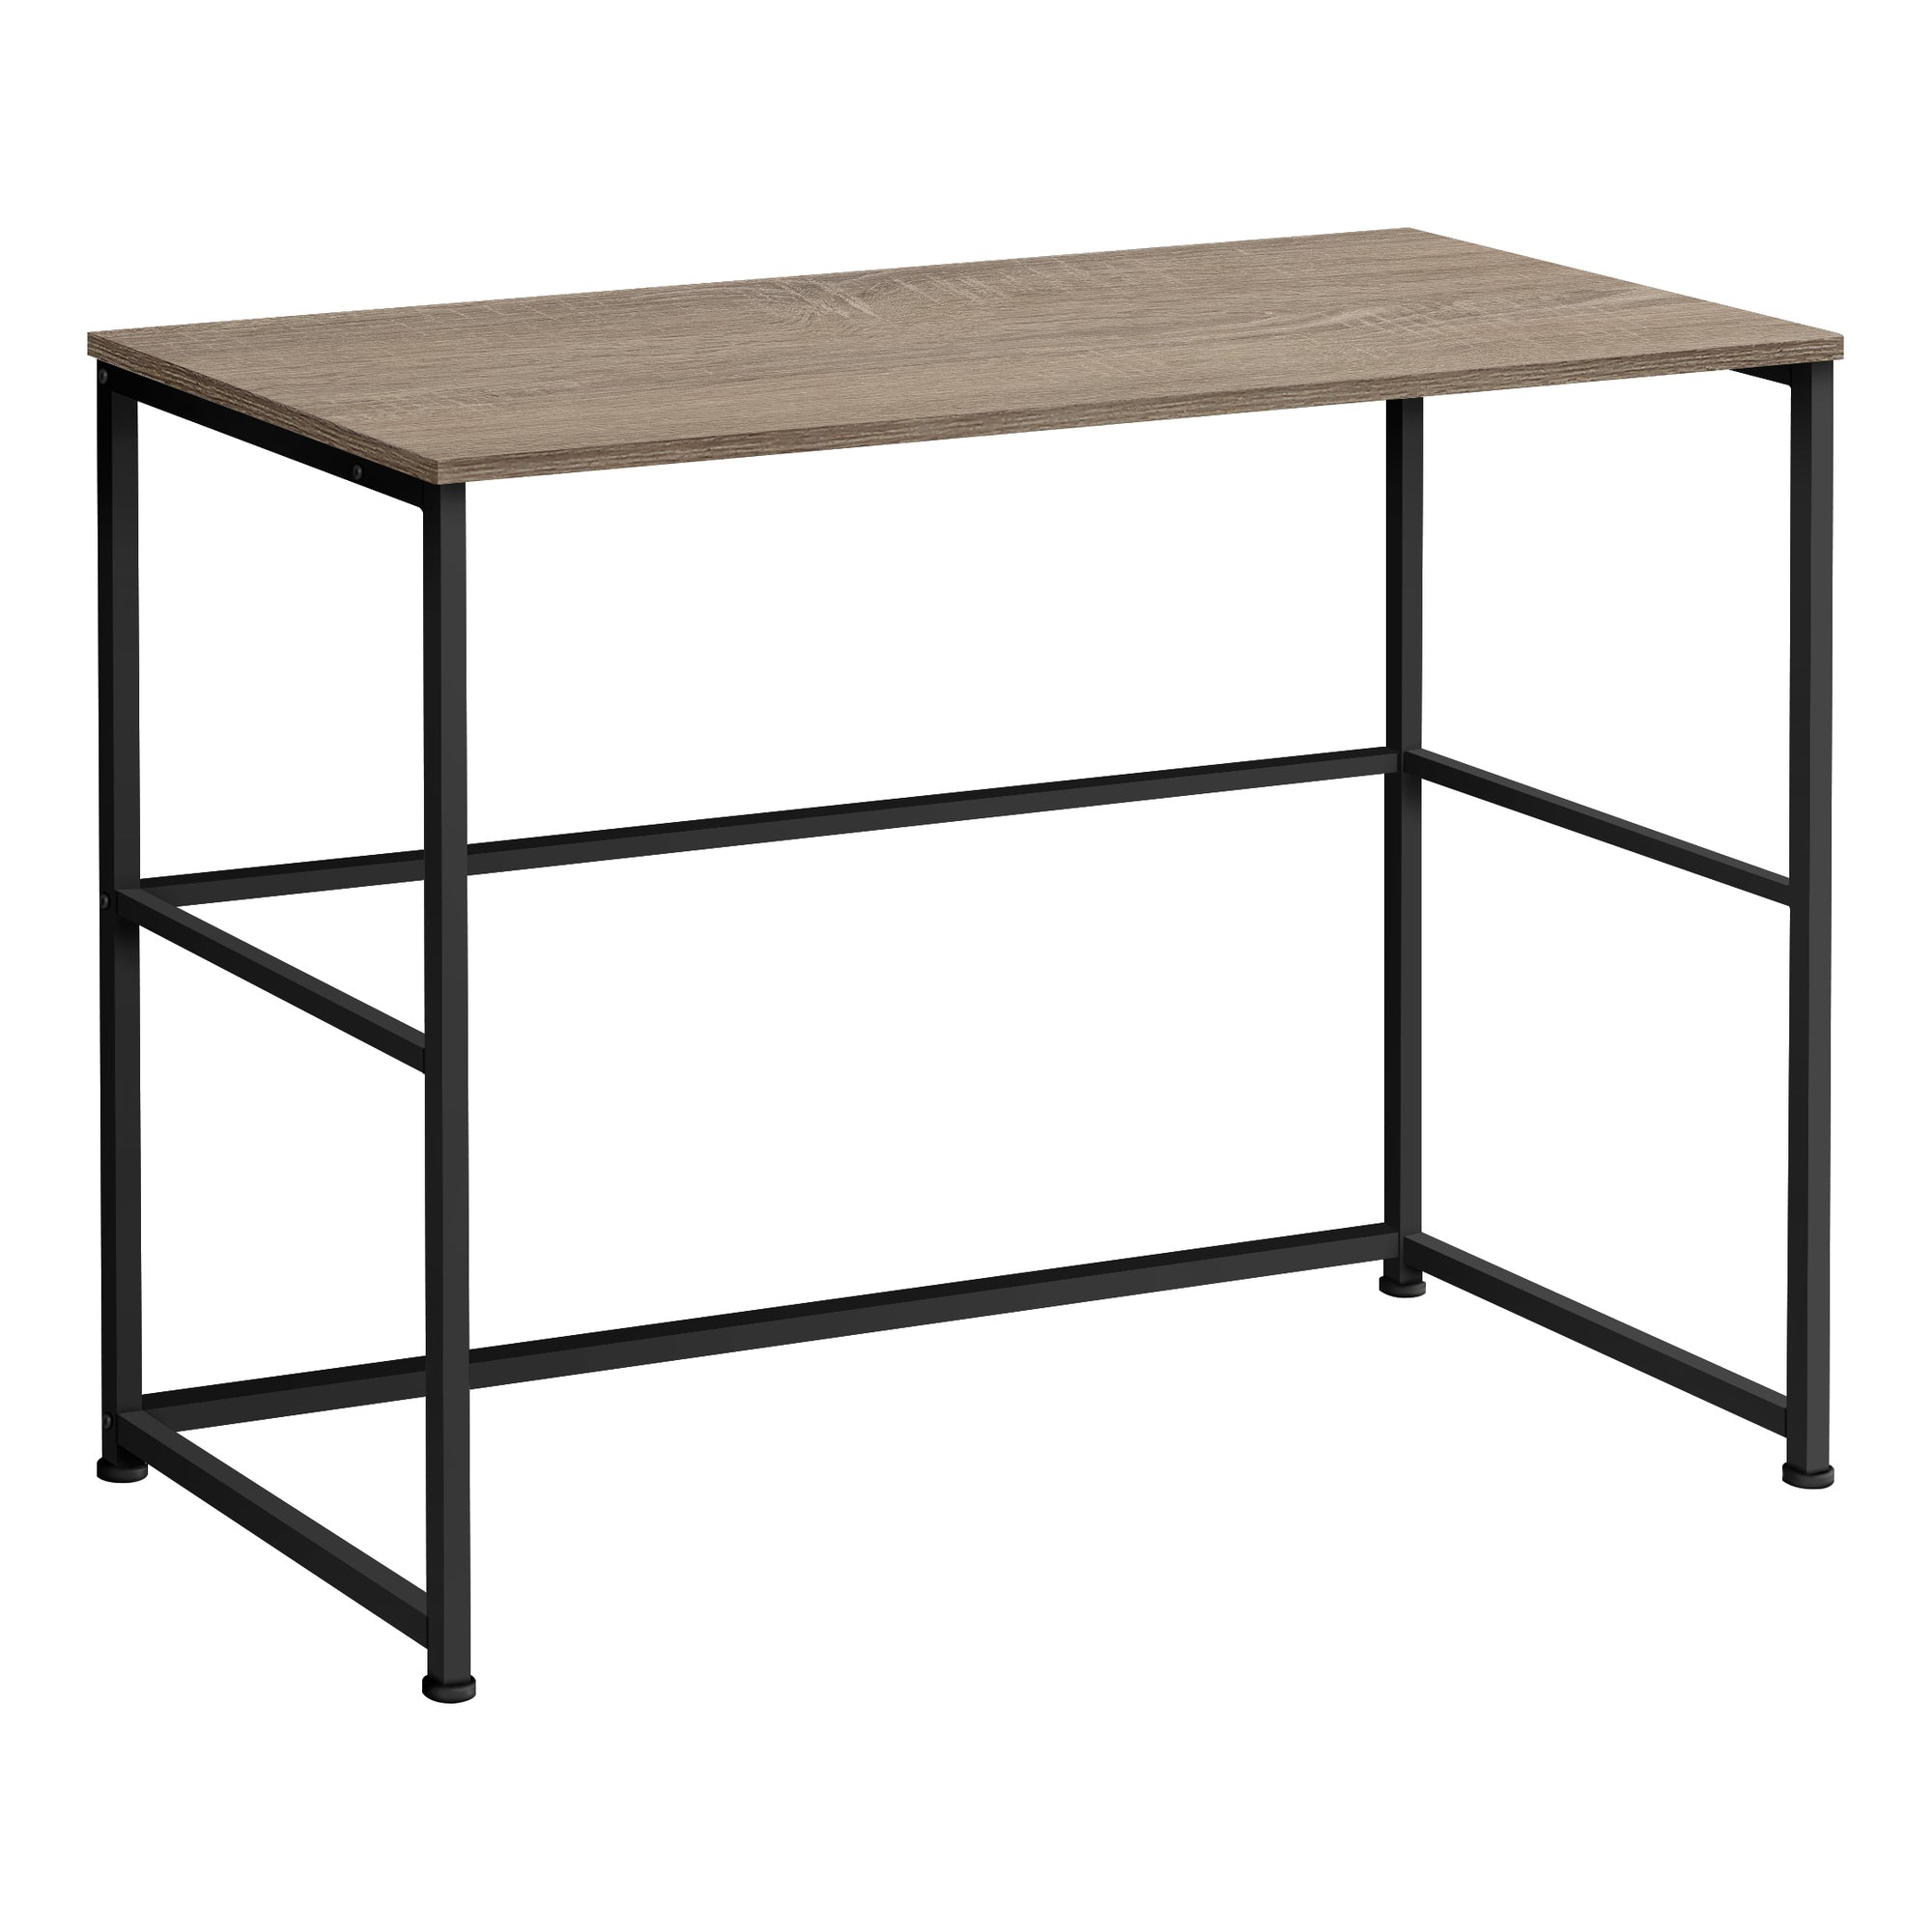 MN-267777    Computer Desk - Small Writing Or Laptop Table / Modern Style / Metal Frame - 40"L - Dark Taupe / Black